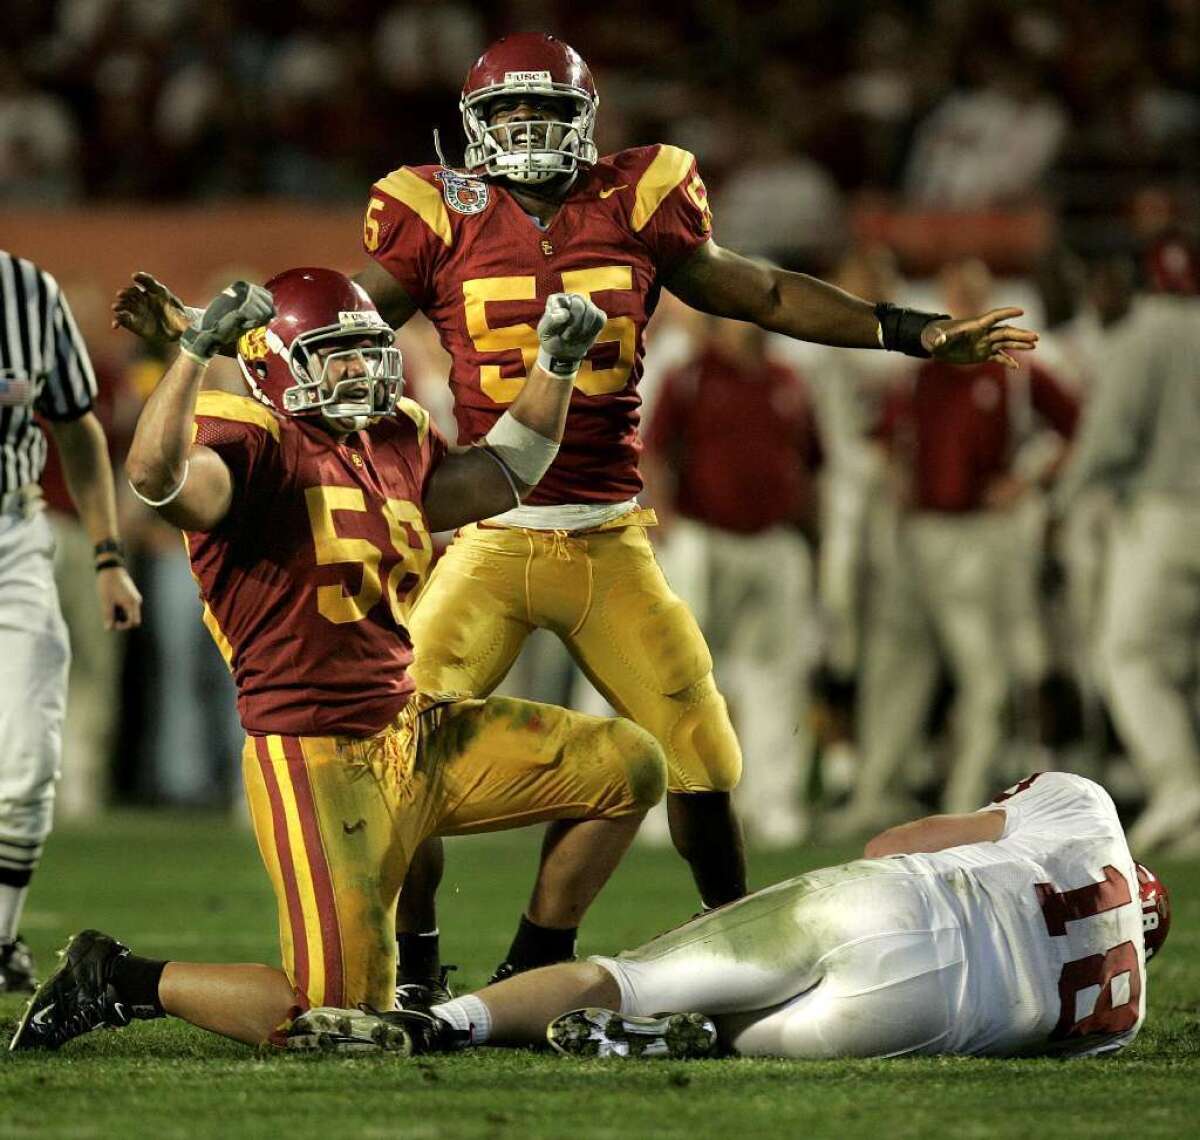 Lofa Tatupu (58) flexes with Keith Rivers (55) after sacking Oklahoma quarterback Jason White in the third quarter in the national championship at the Orange Bowl on Jan. 4, 2005.